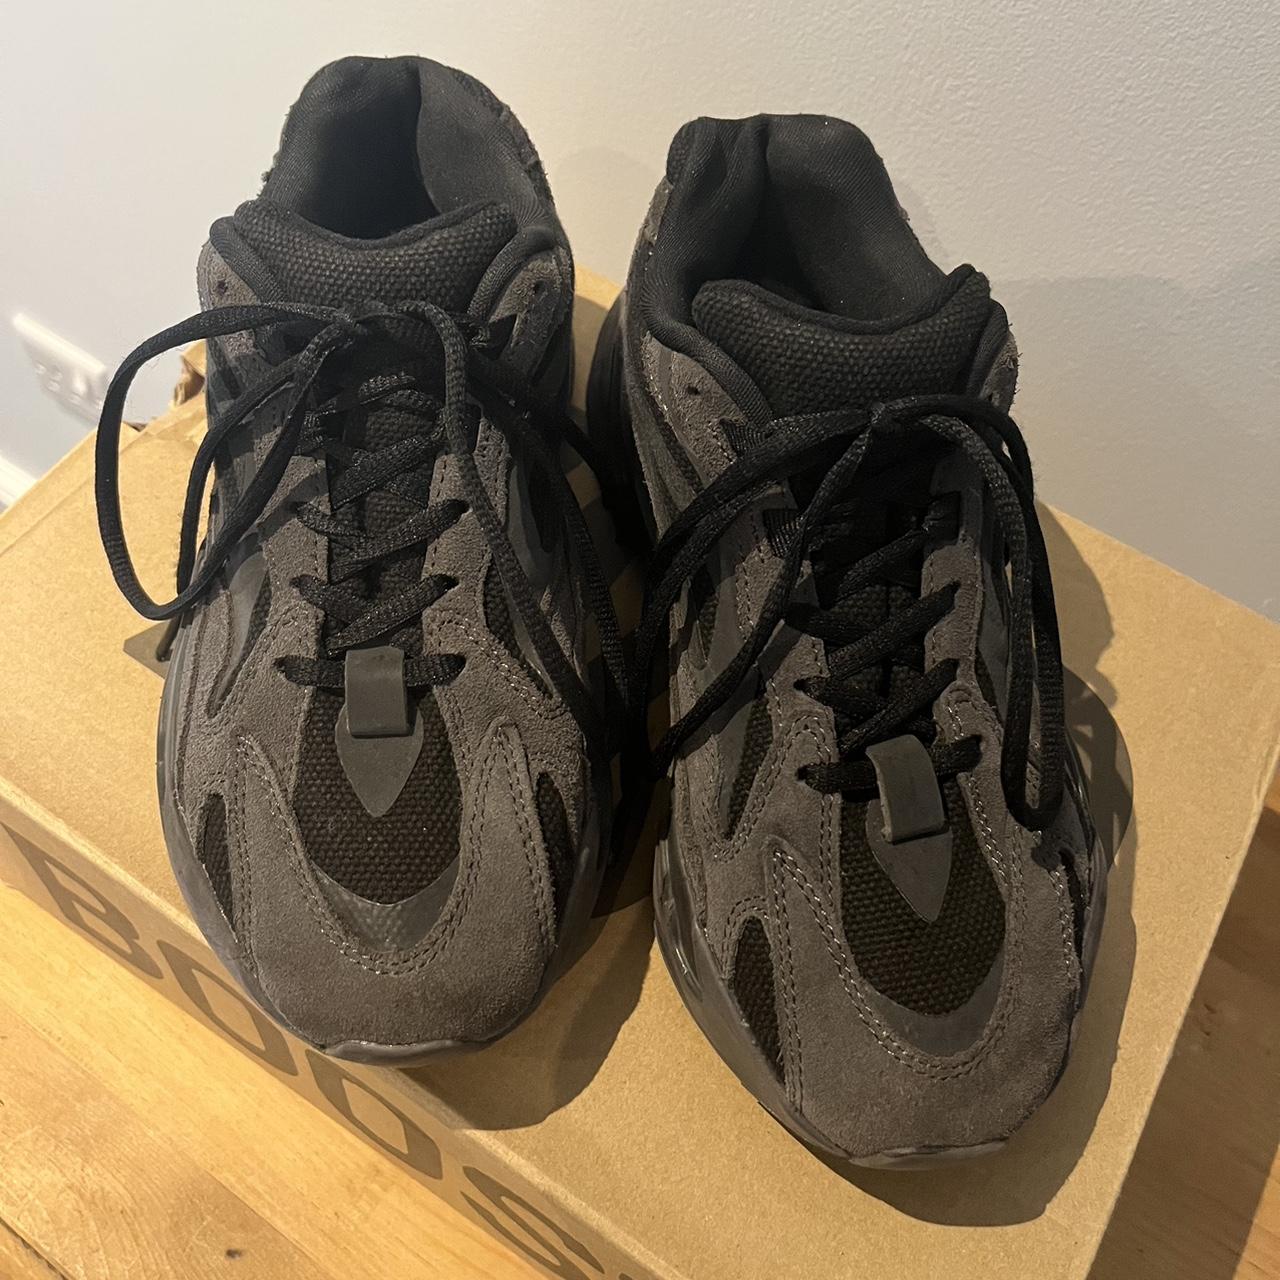 Adidas YEEZY 700 Boost. Size 5. Comes with original... - Depop